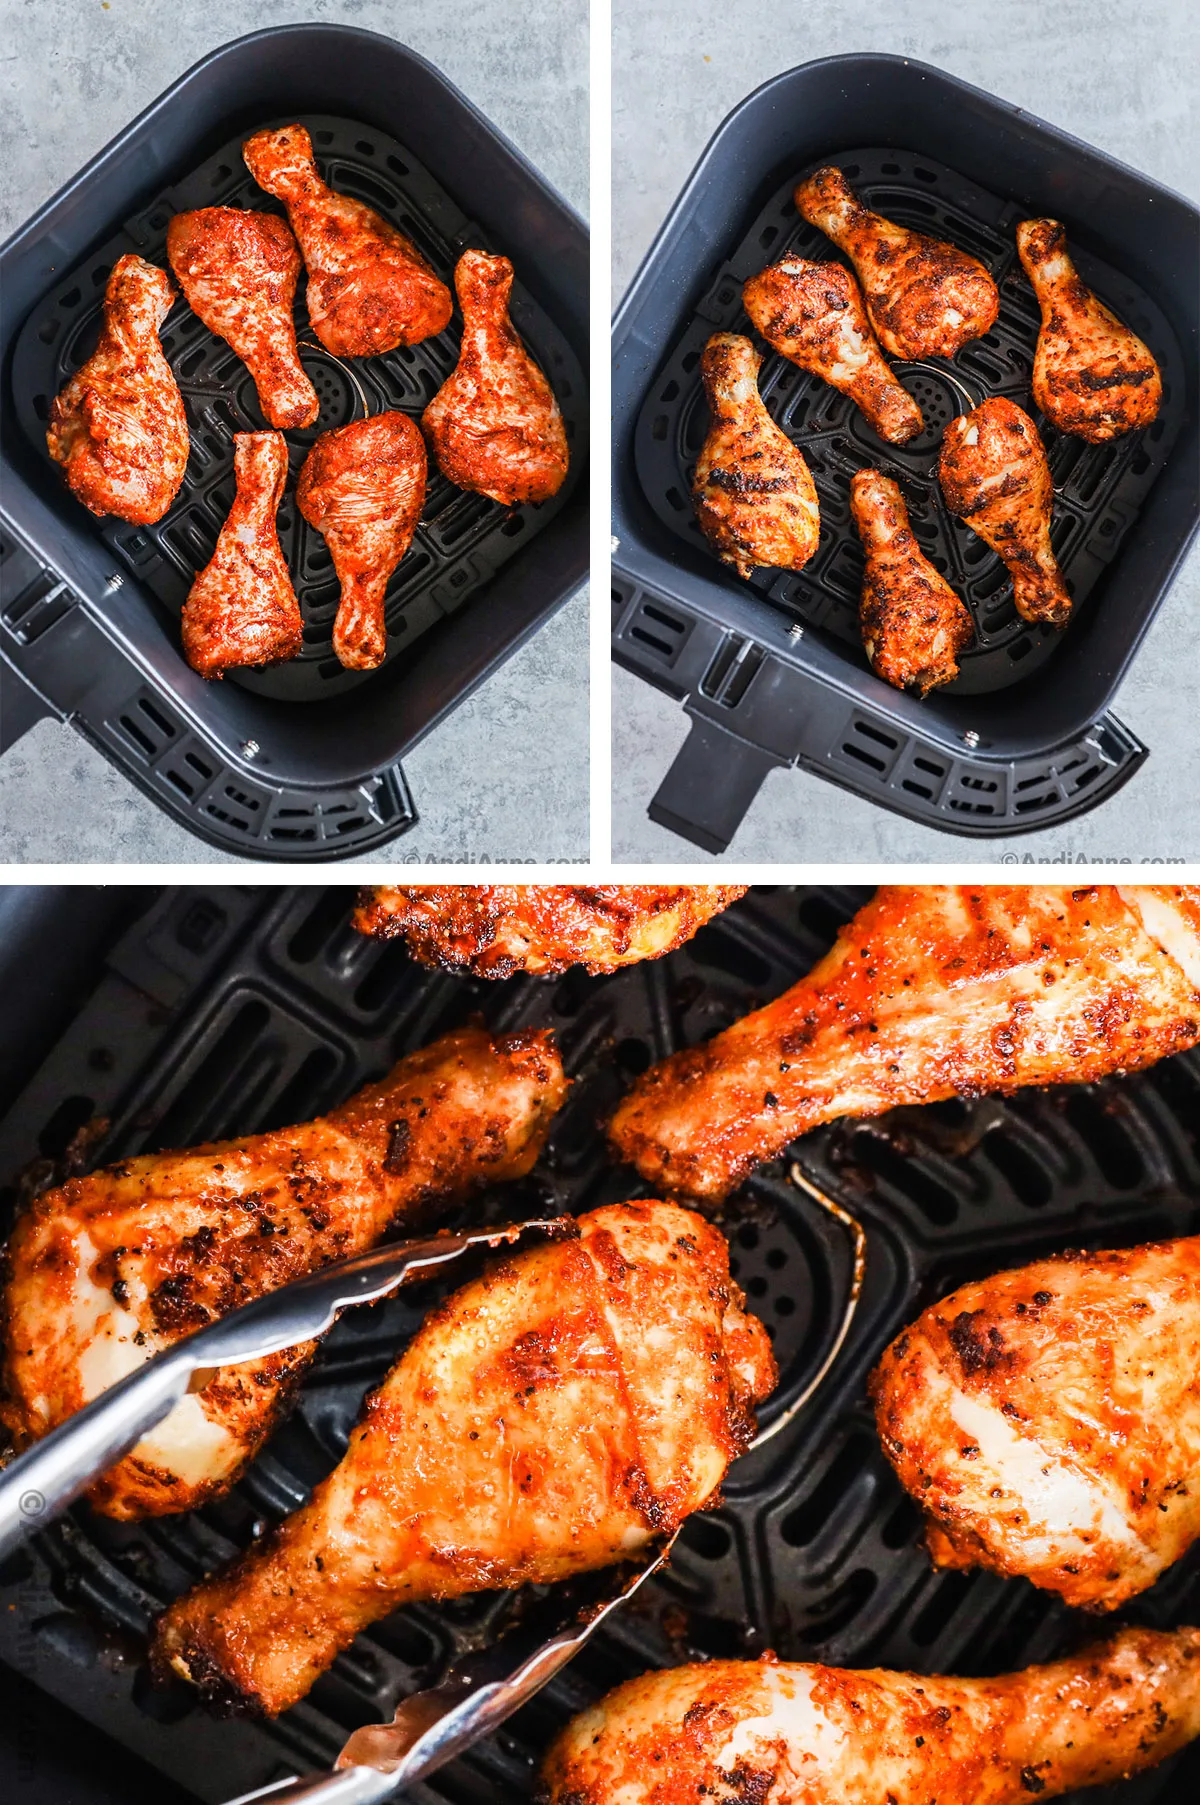 Three images of chicken legs in an air fryer basket covered in sauce in various cooking stages.